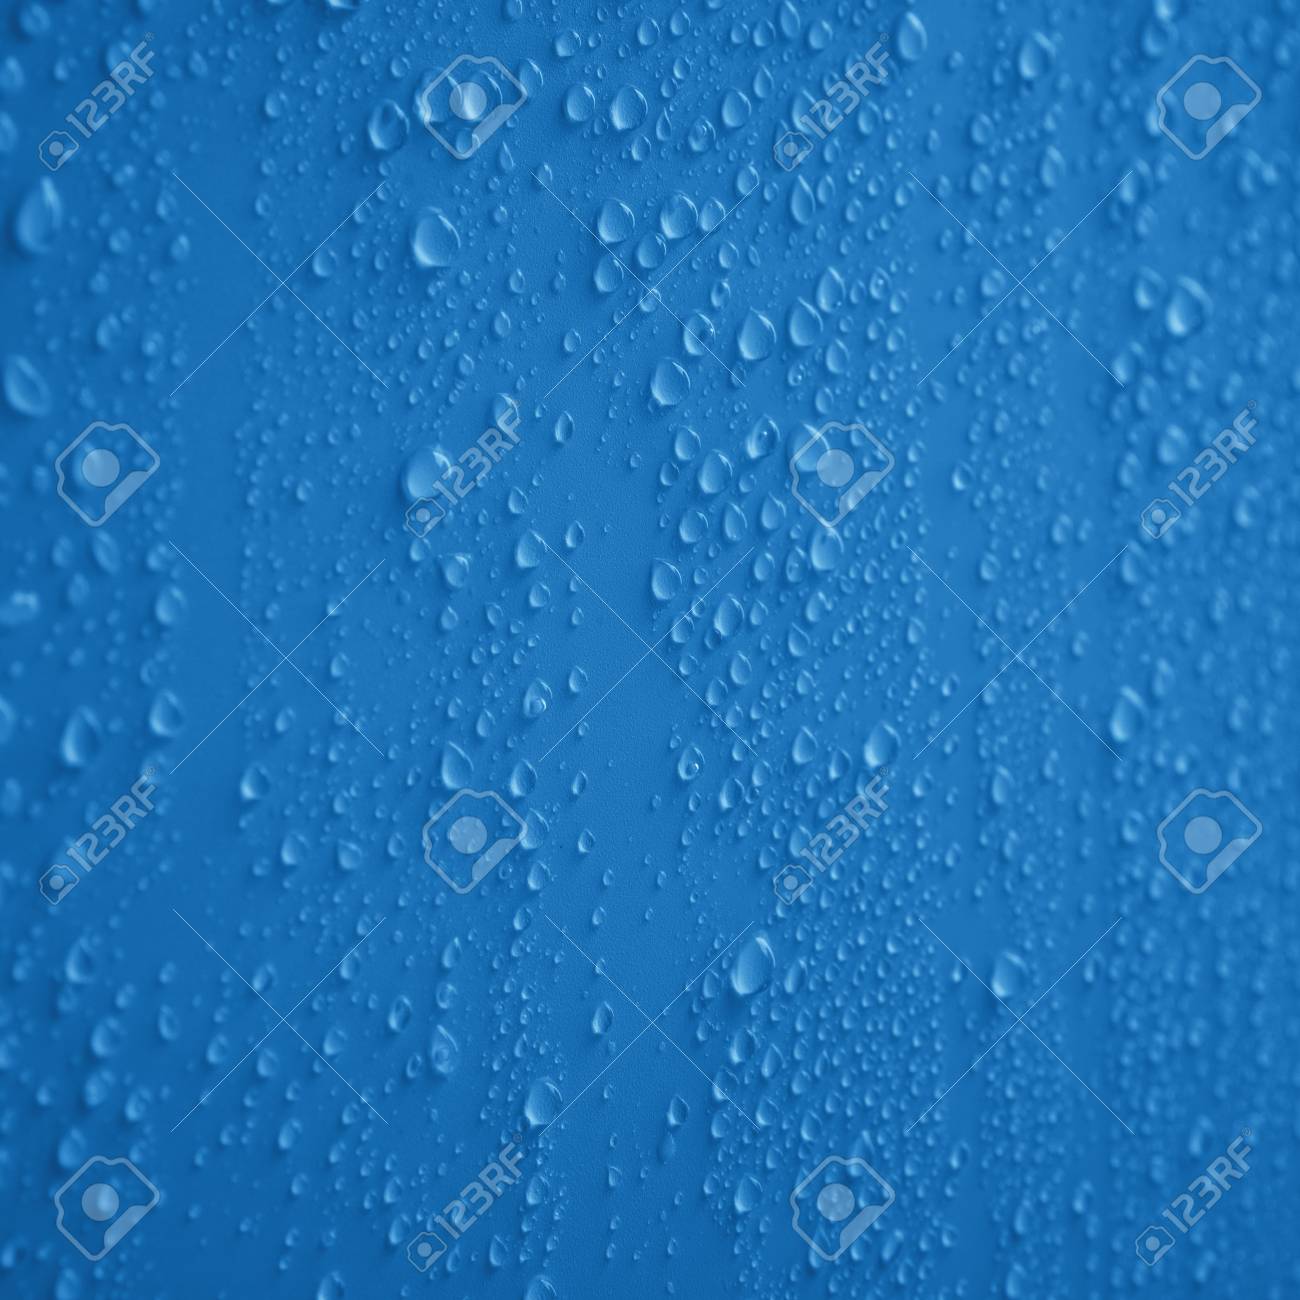 Transparent Waterdrop Or Raindrops Vapor On Solid Background